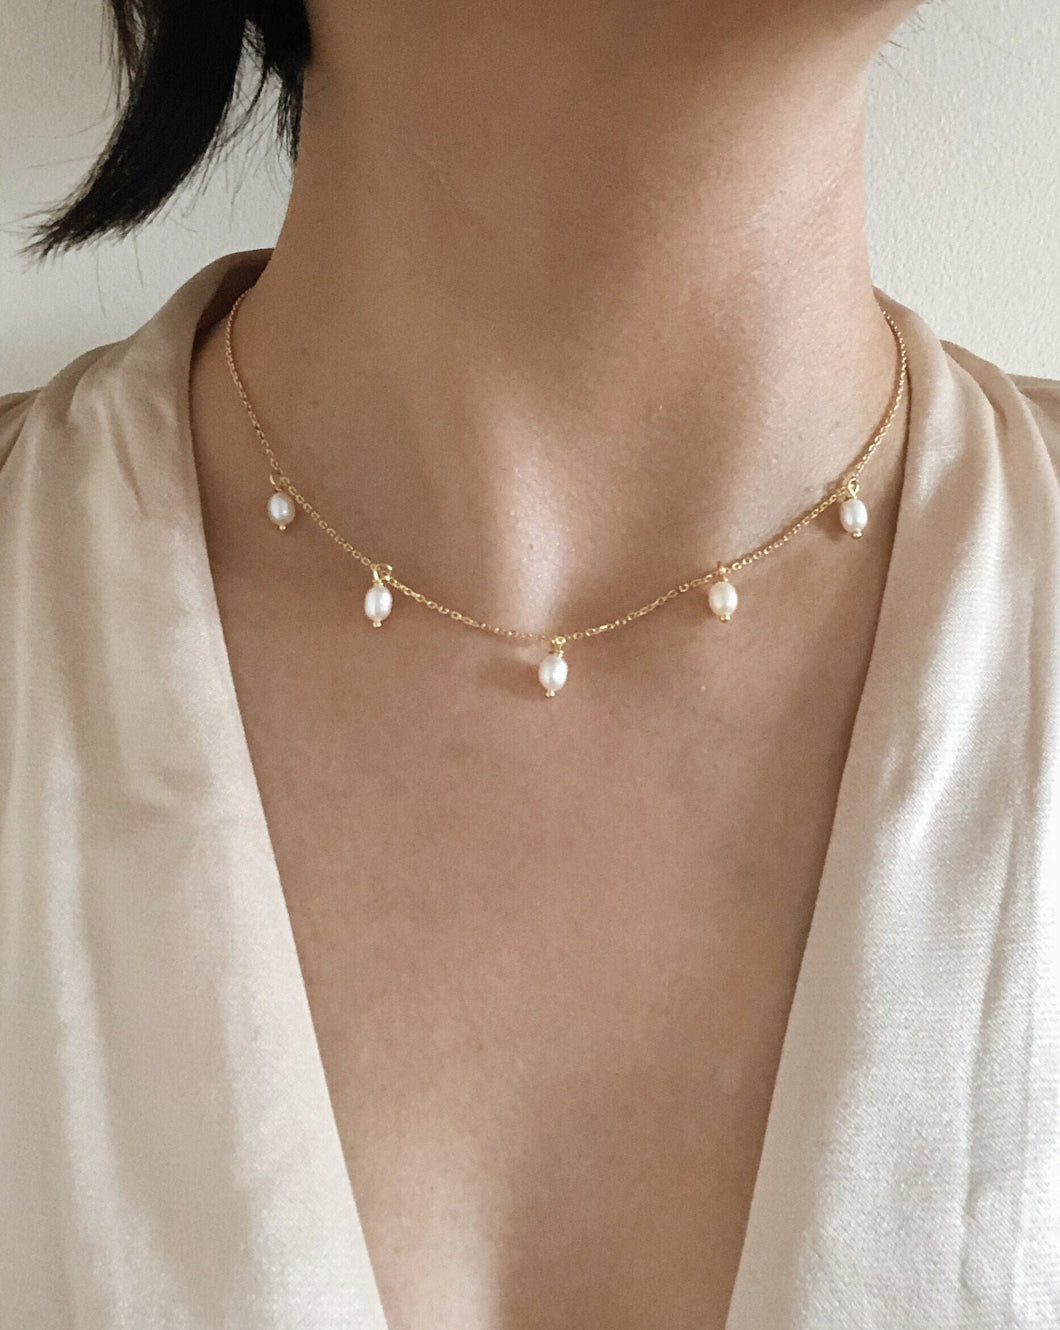 Satellite pearl choker, orb, baroque pearl necklace, genuine, freshwater pearls, mini pearl necklace, boho choker, stacking, bridal, wedding